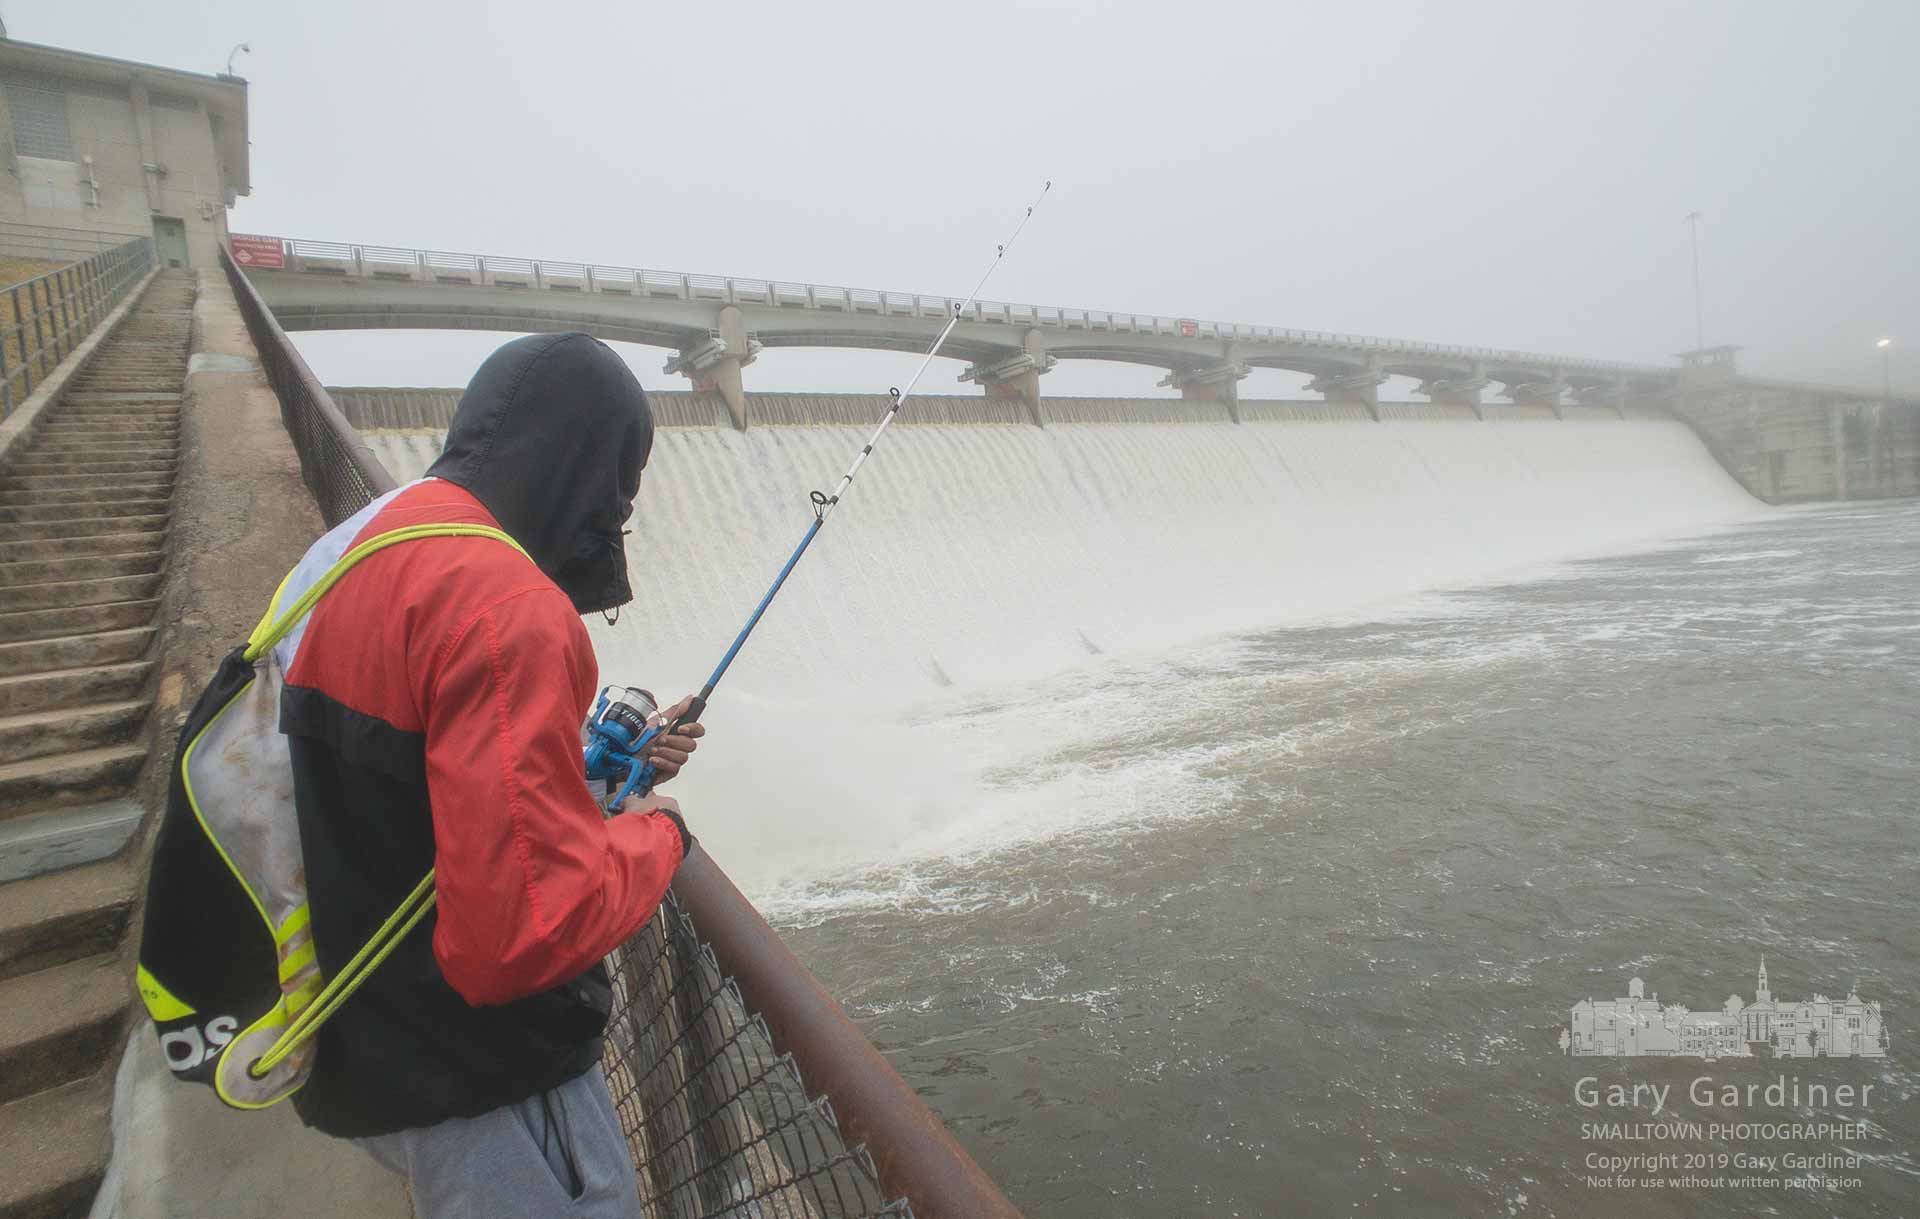 An angler tests the waters below the fog-shrouded Hoover Dam where heavy runoff from melting snow flows into Big Walnut Creek. My Final Photo for Feb. 5, 2019.